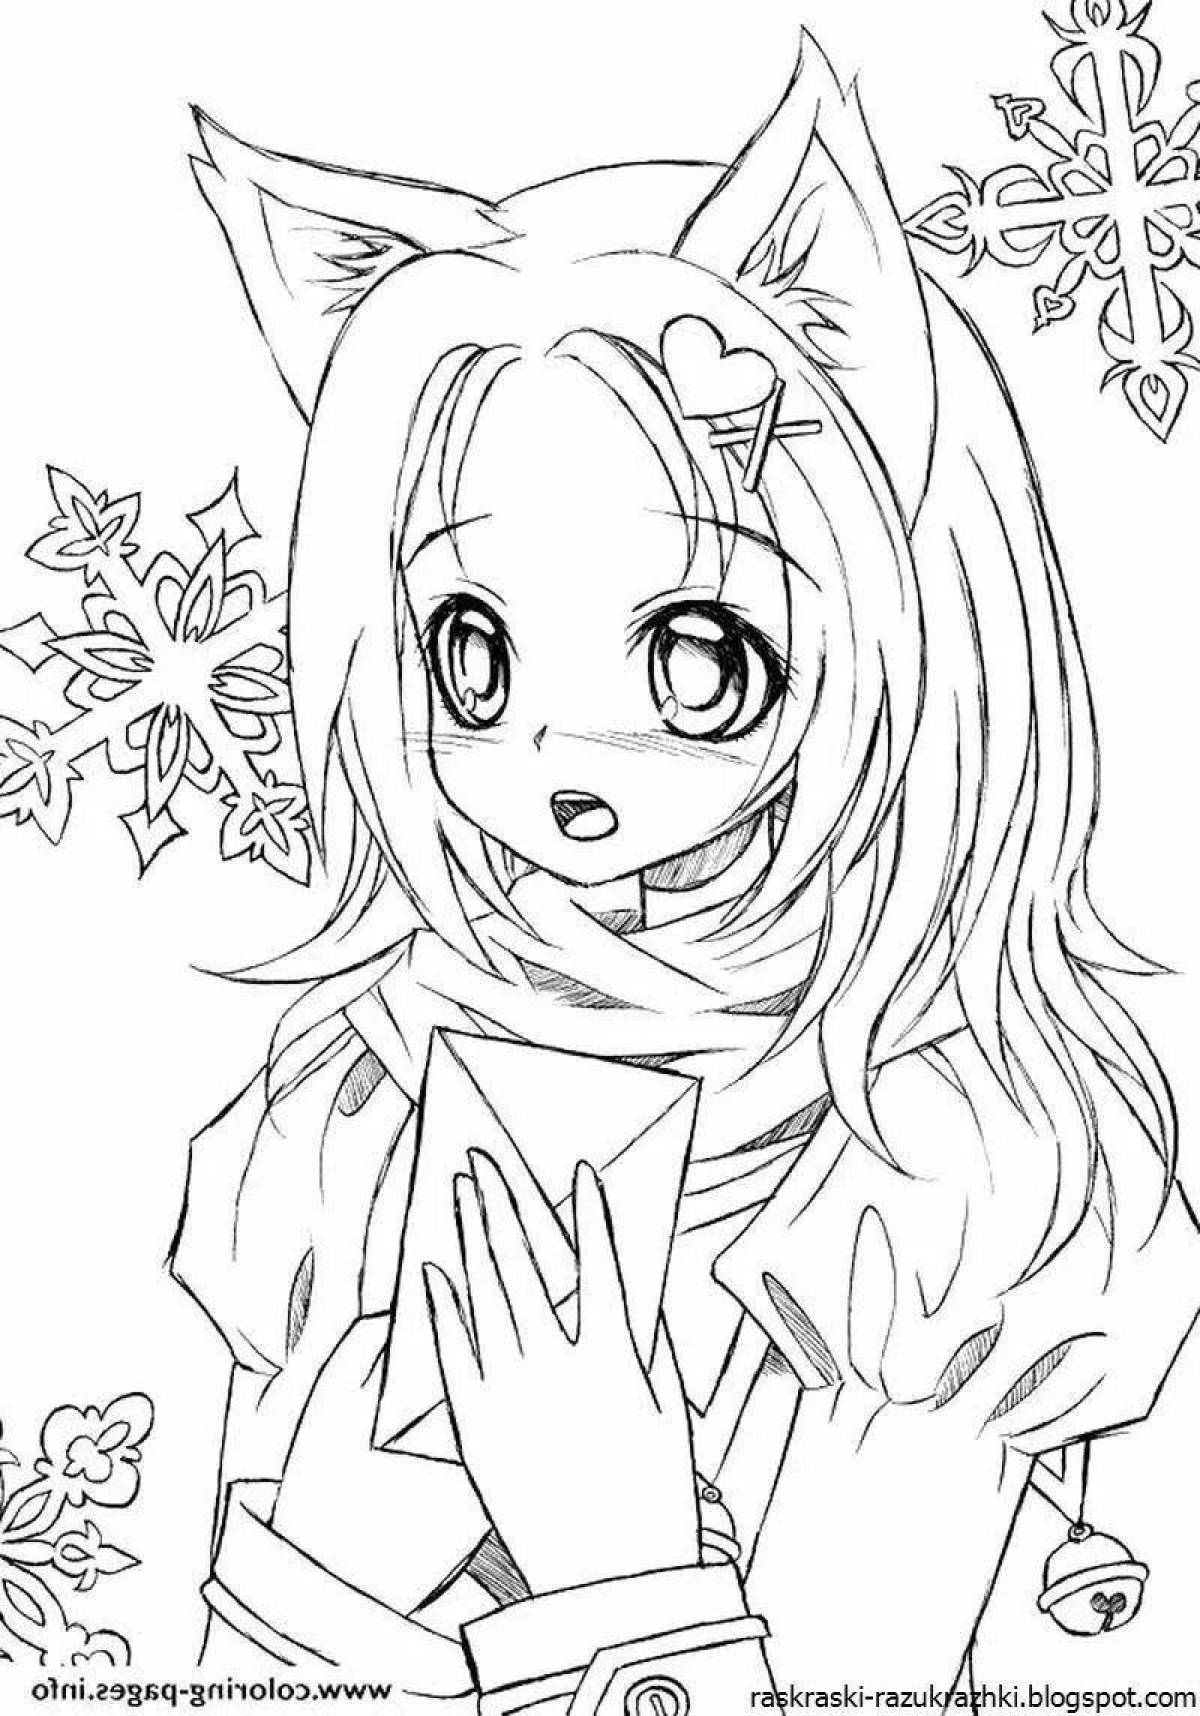 Amazing coloring book for girls anime cute